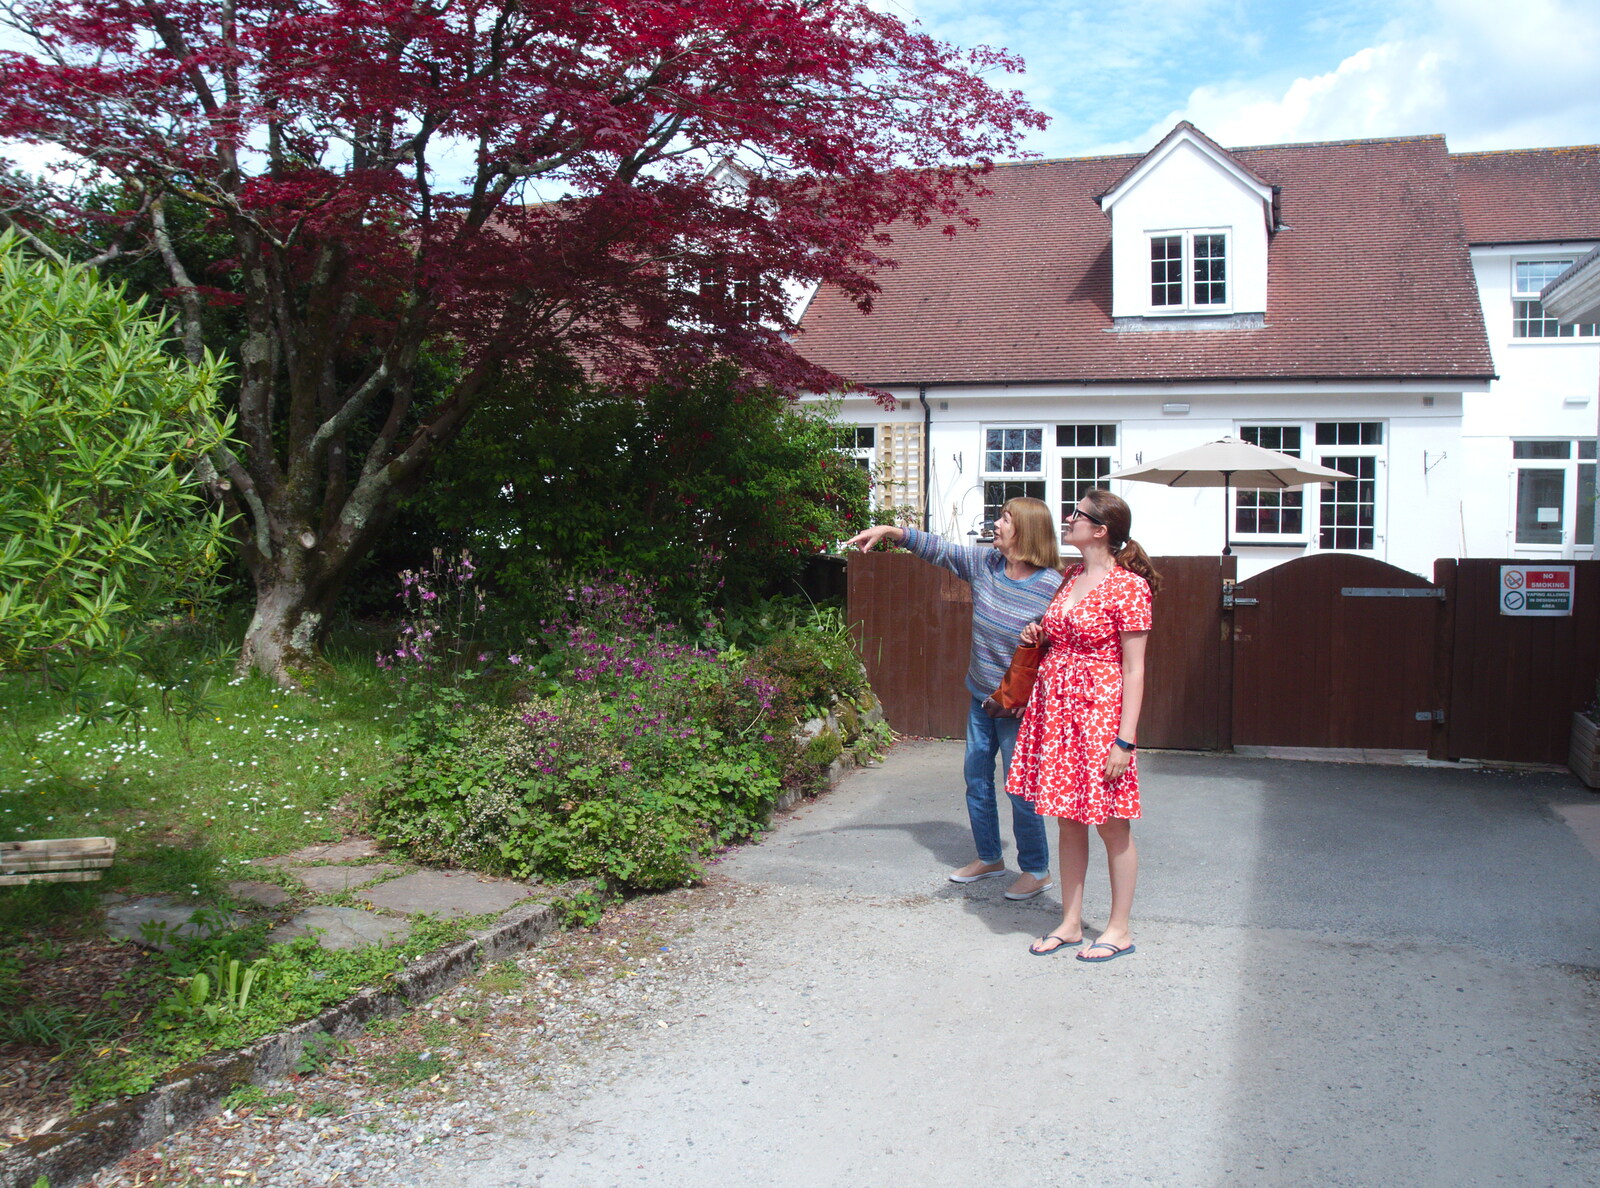 Chagford Lido and a Trip to Parke, Bovey Tracey, Devon - 25th May 2019: Mother shows off the gardens